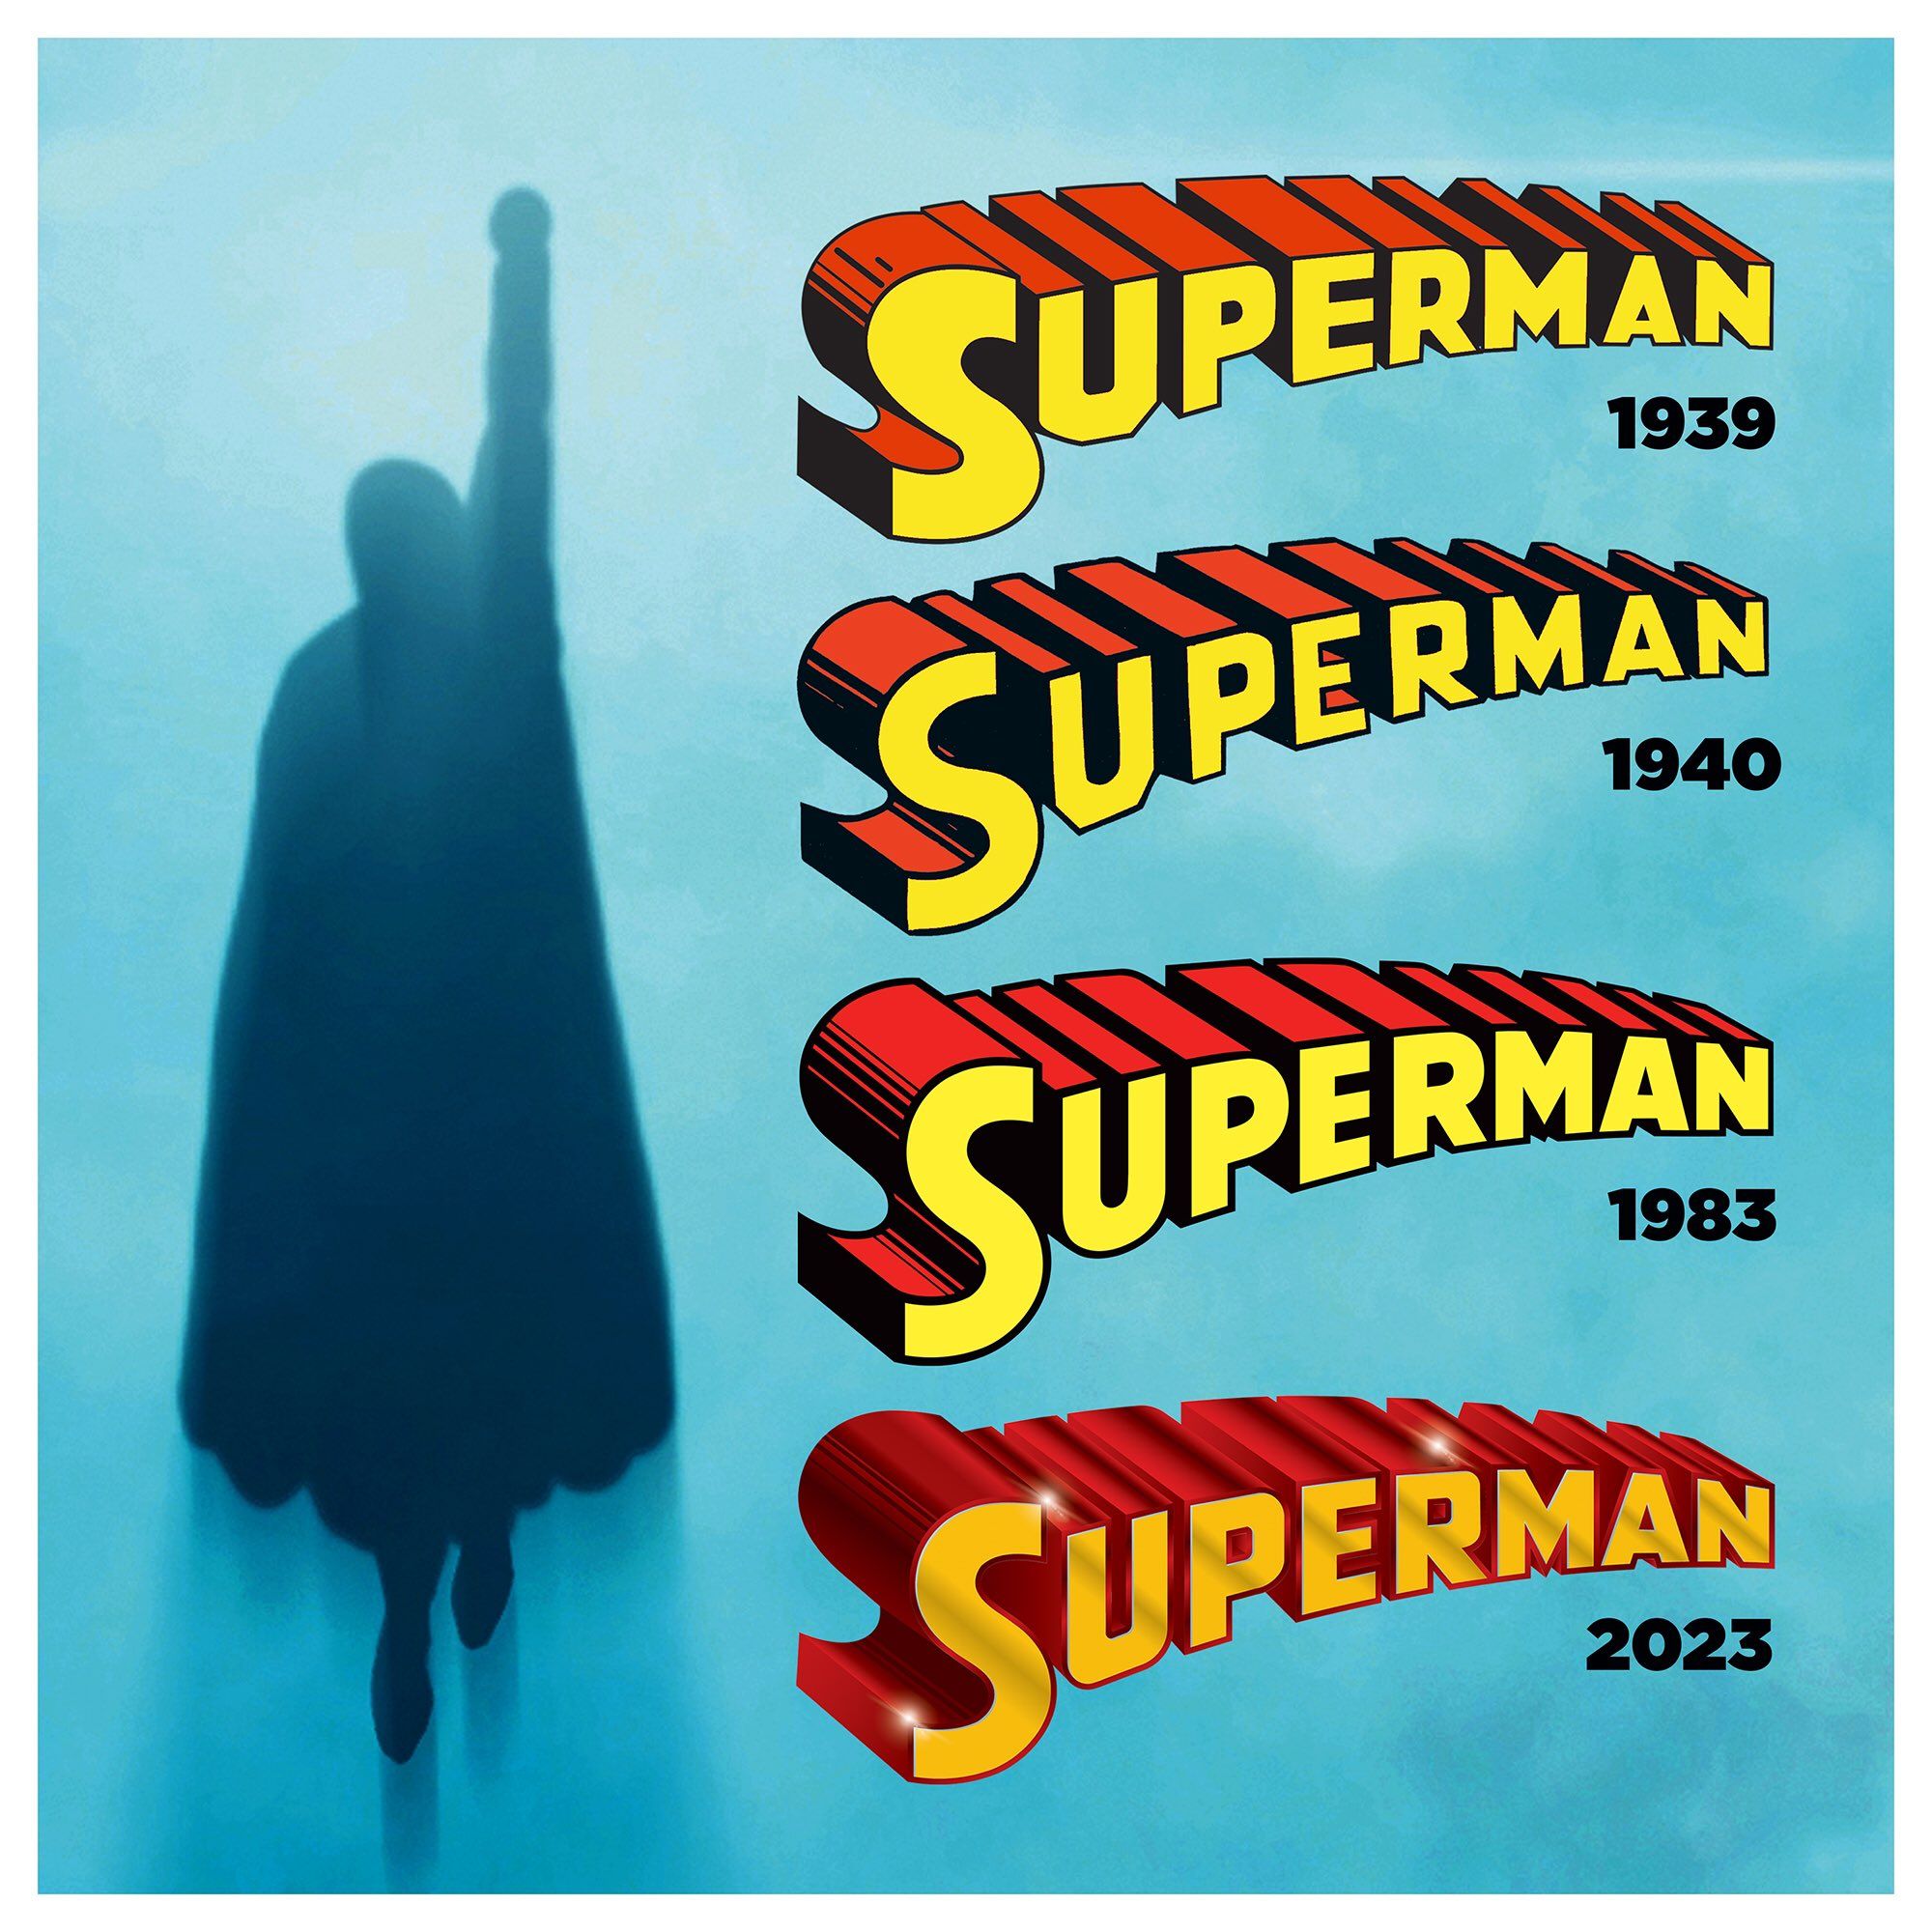 Superman logo word mark as it was in 1939, 1940, 1983, and 2023